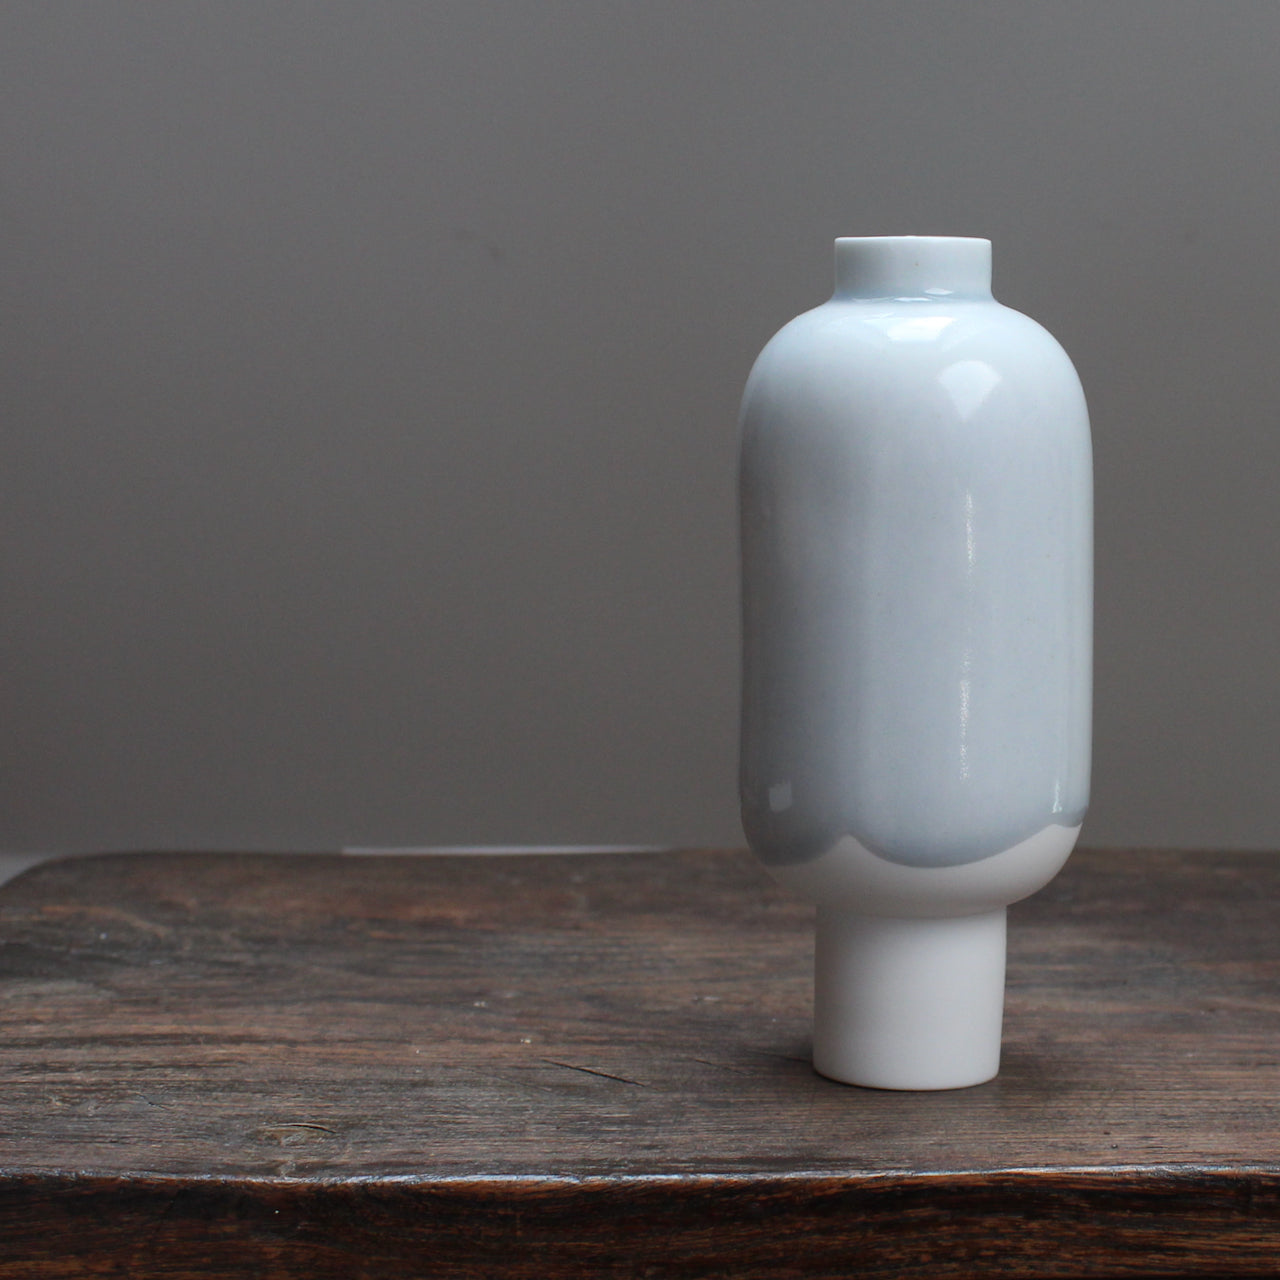 Small pale blue and white ceramic vessel on a wooden table 